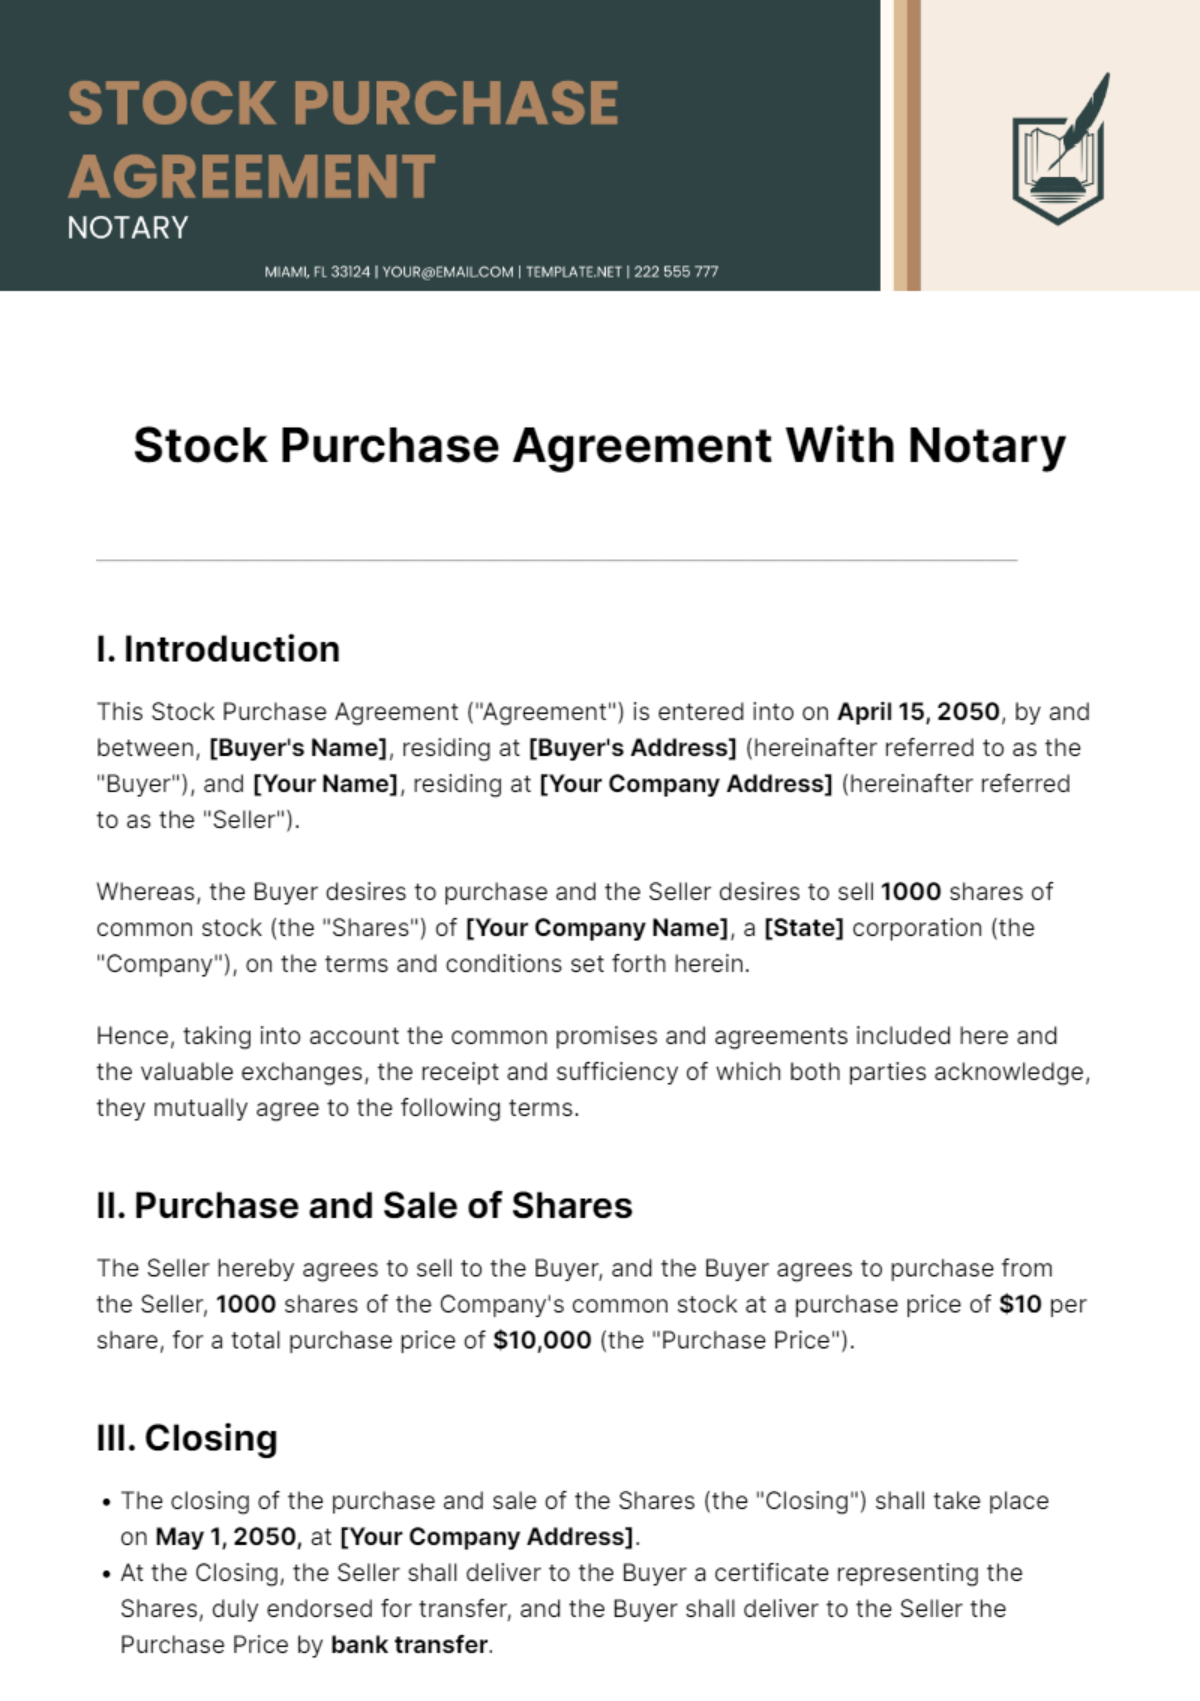 Stock Purchase Agreement With Notary Template